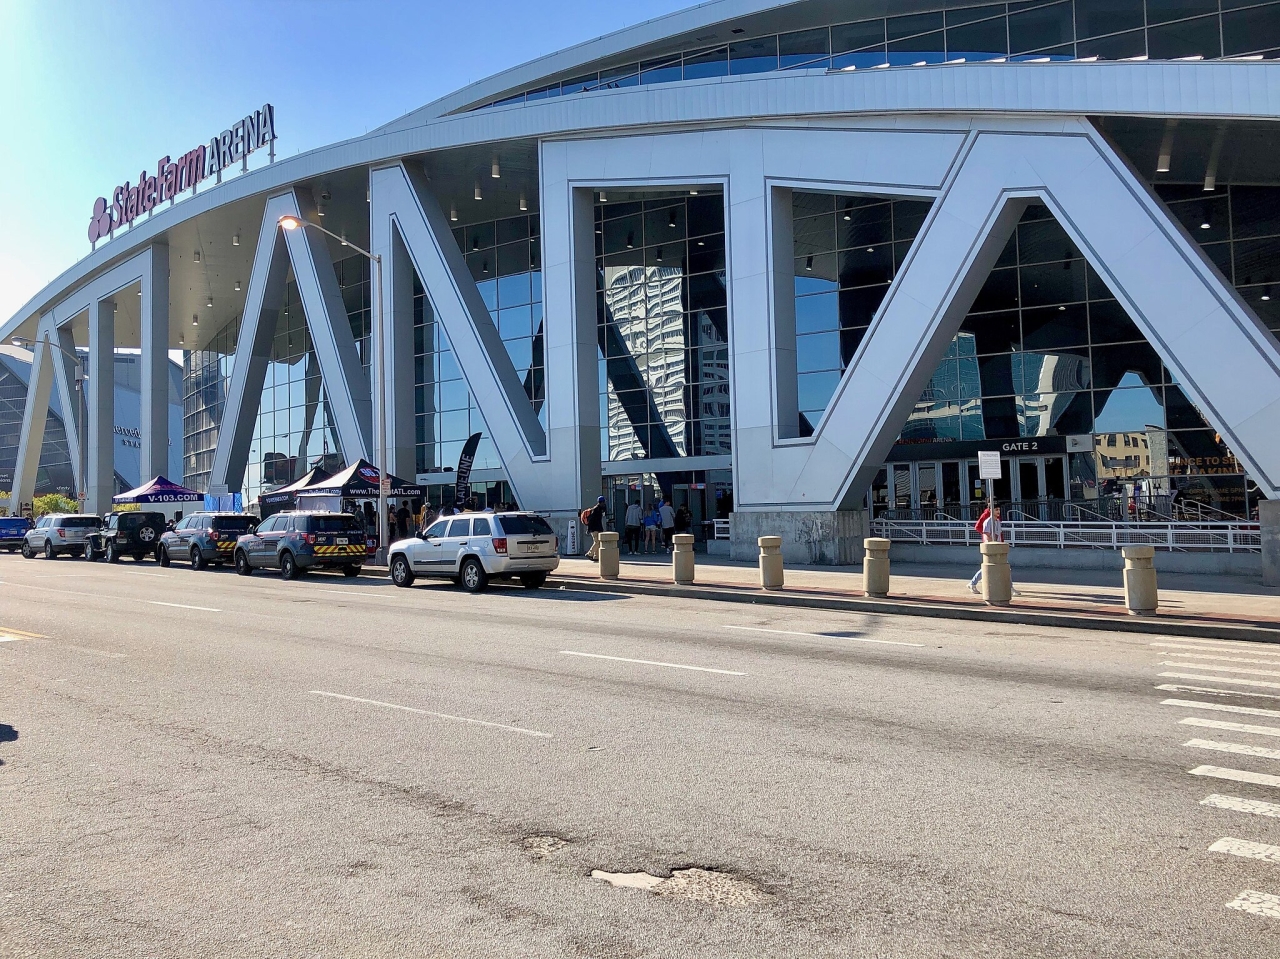 Honeywell and Hawks Partner to Help Improve Building Sustainability Efforts at State Farm Arena